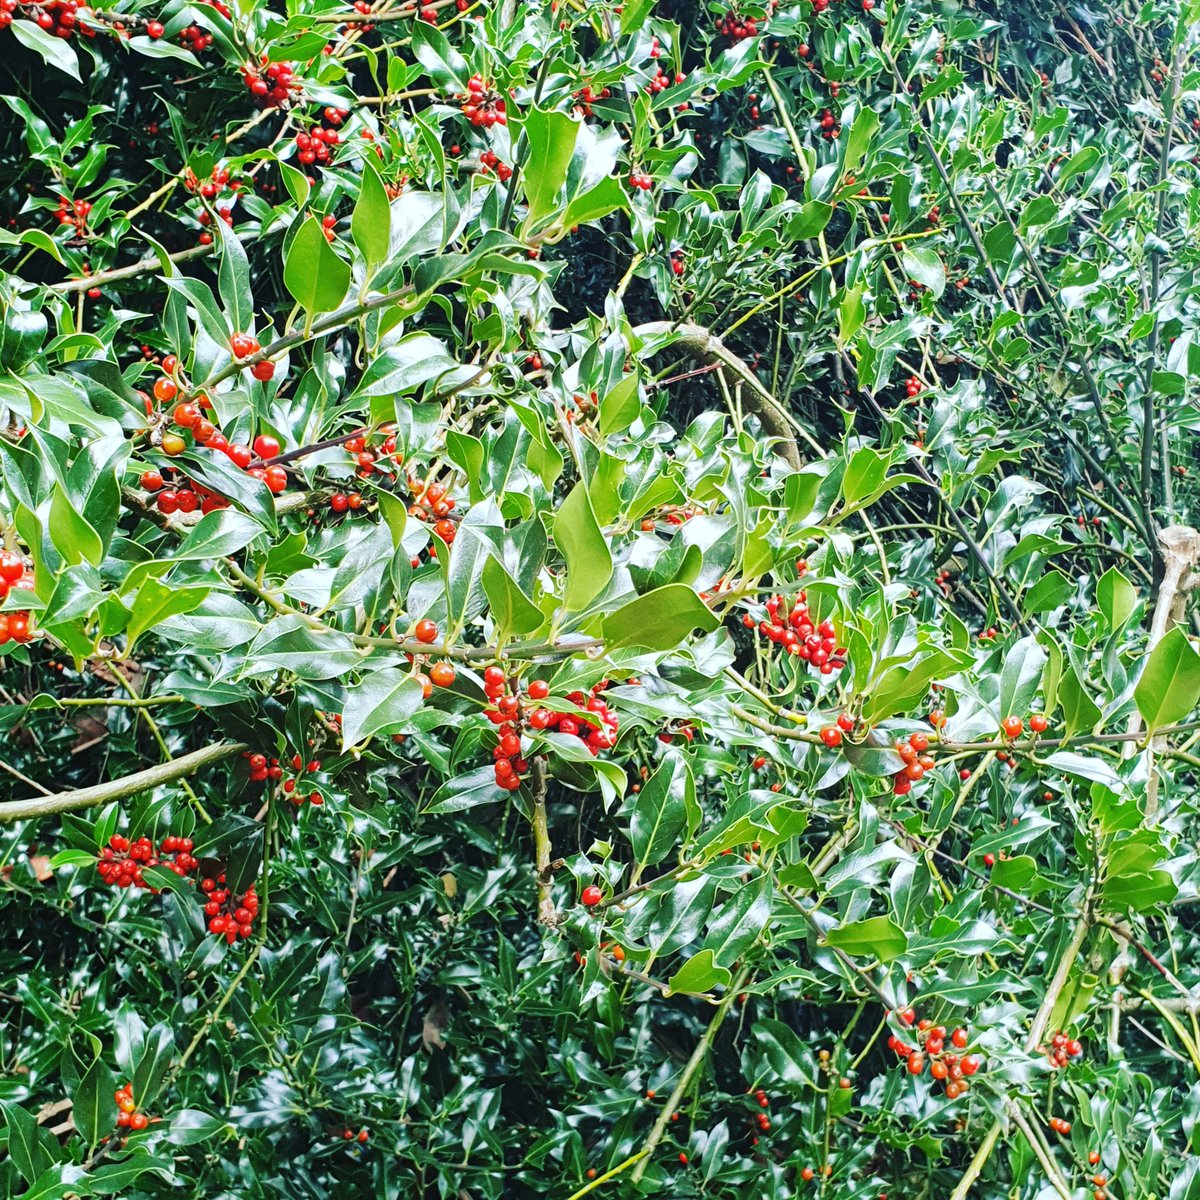 Oxford getting ready for Christmas. Holly tree, University Parks @UniofOxford @OxUniParks #photograph #nature #trees